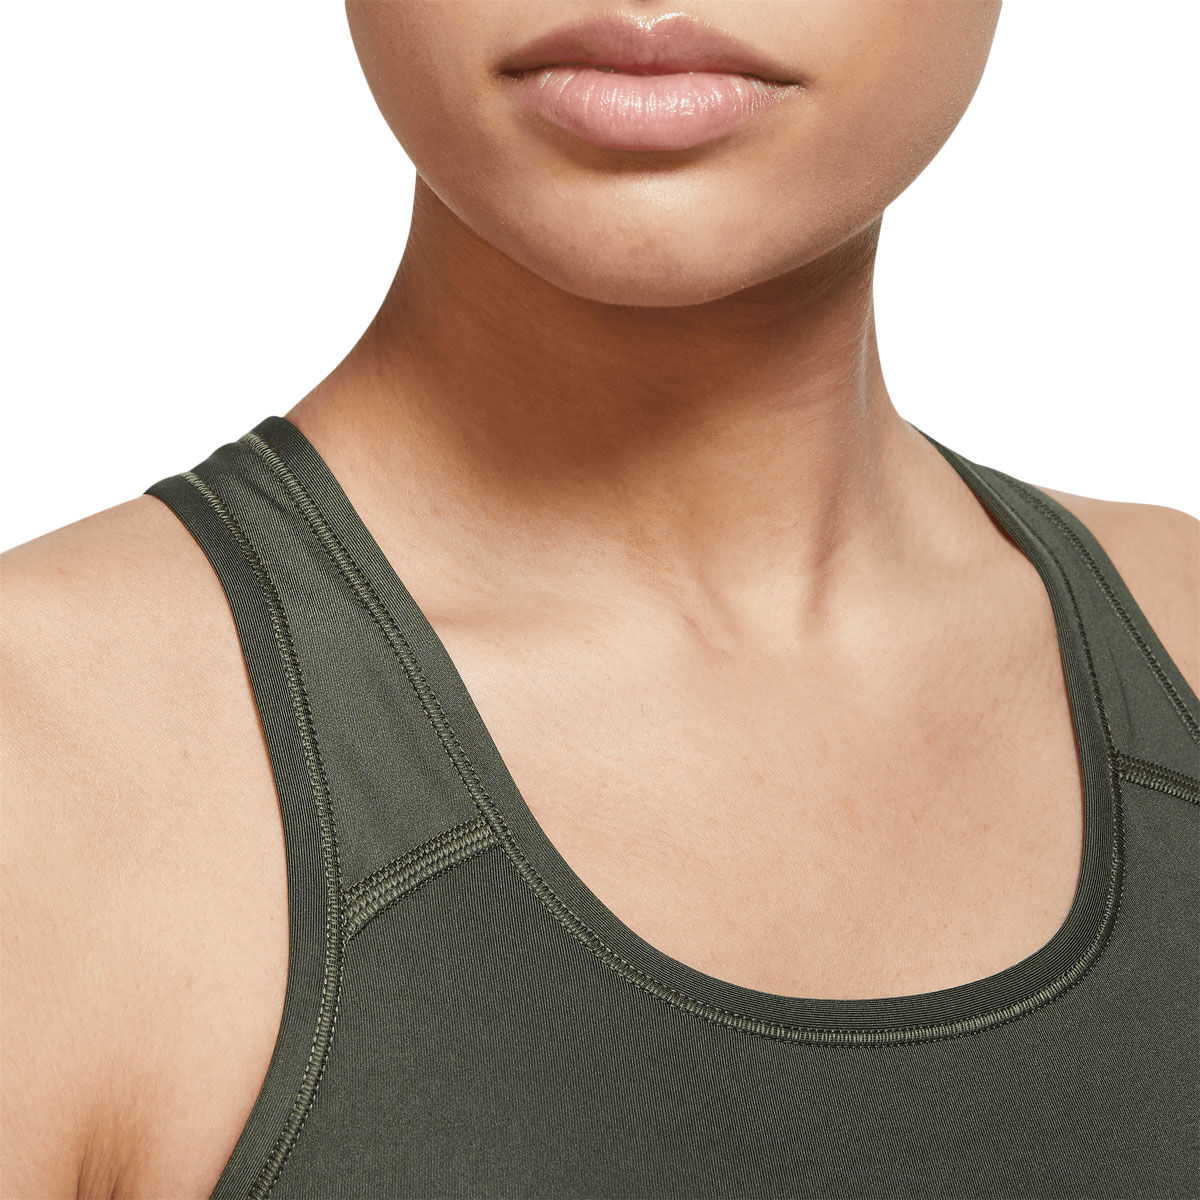 HIIT racer back sports bra with bust seam detail in khaki